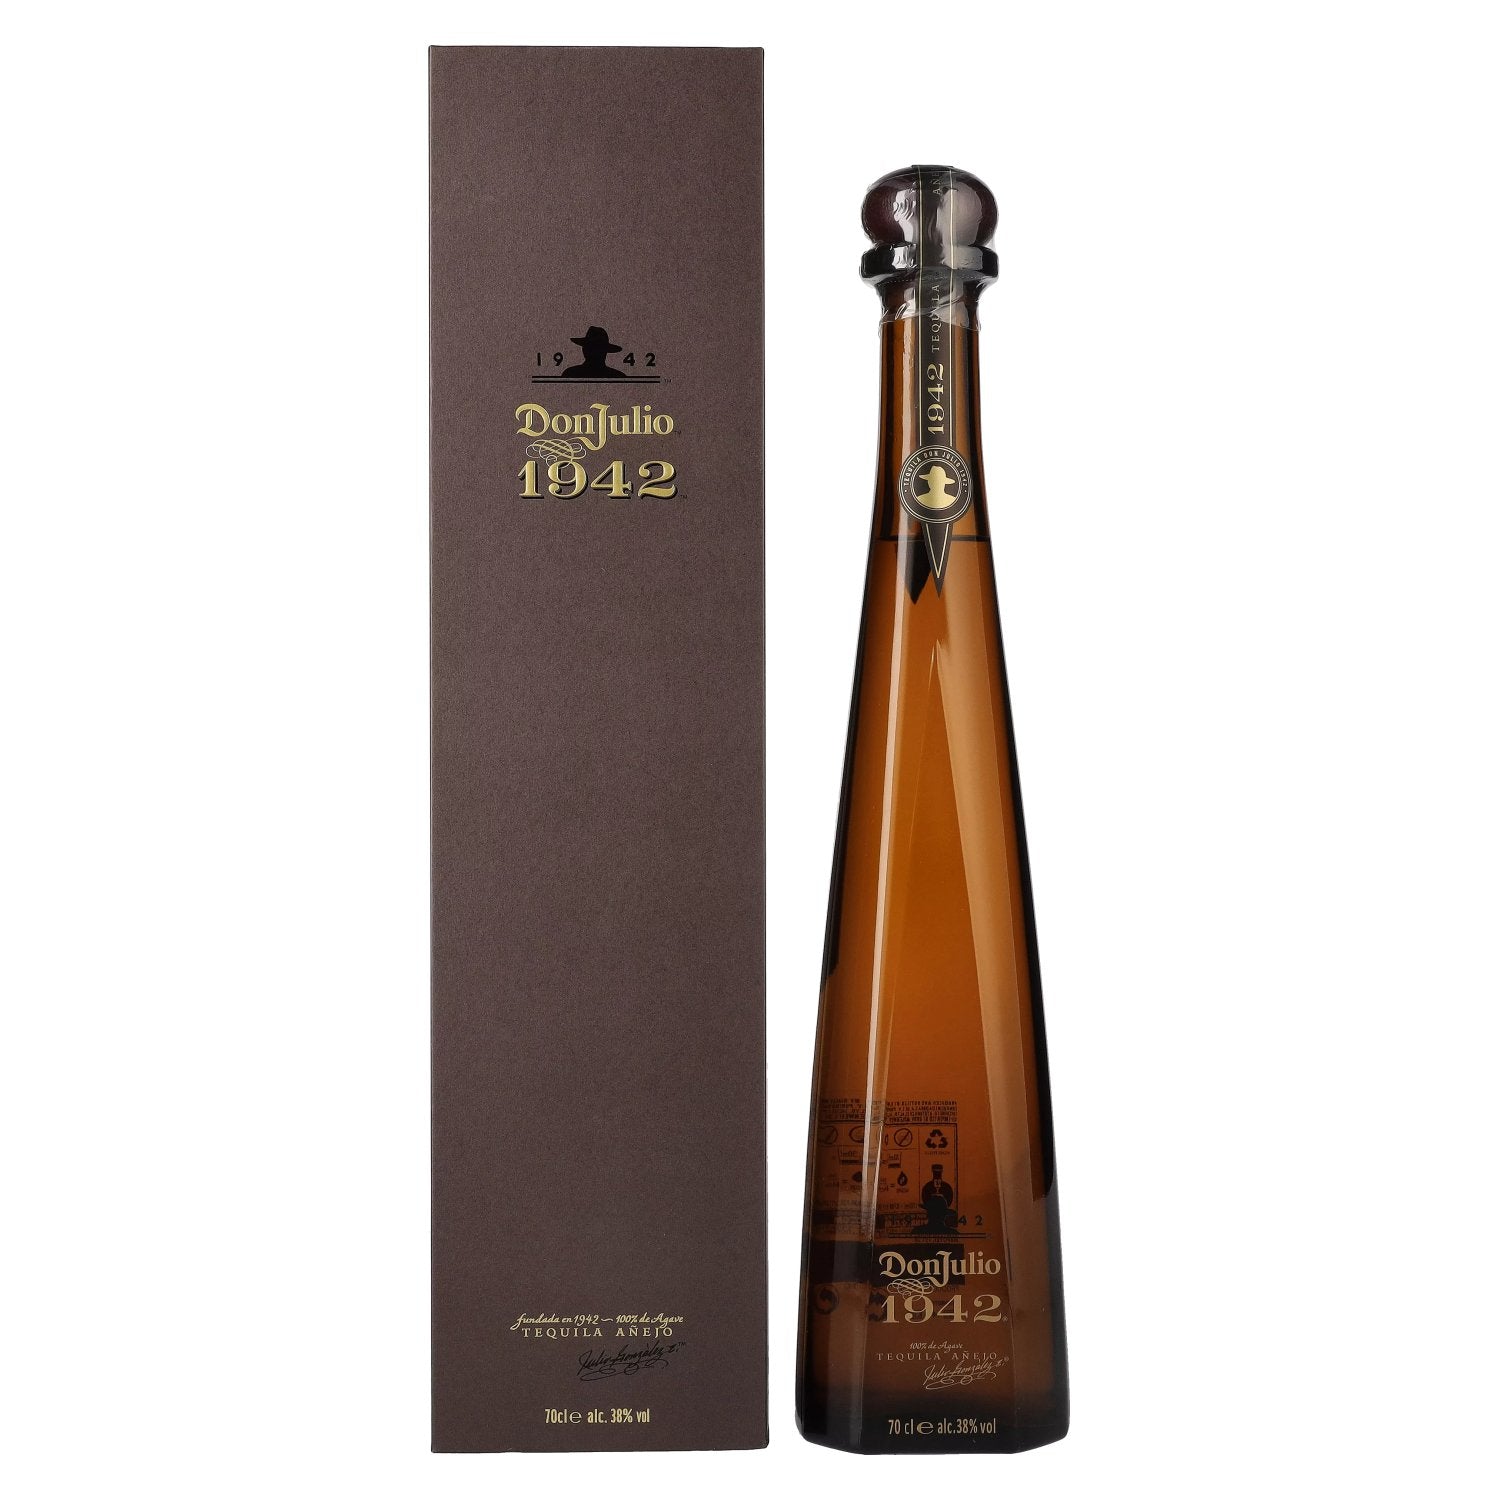 Don Julio 1942 Tequila Anejo 100% Agave 38% Vol. 0,7l in Giftbox